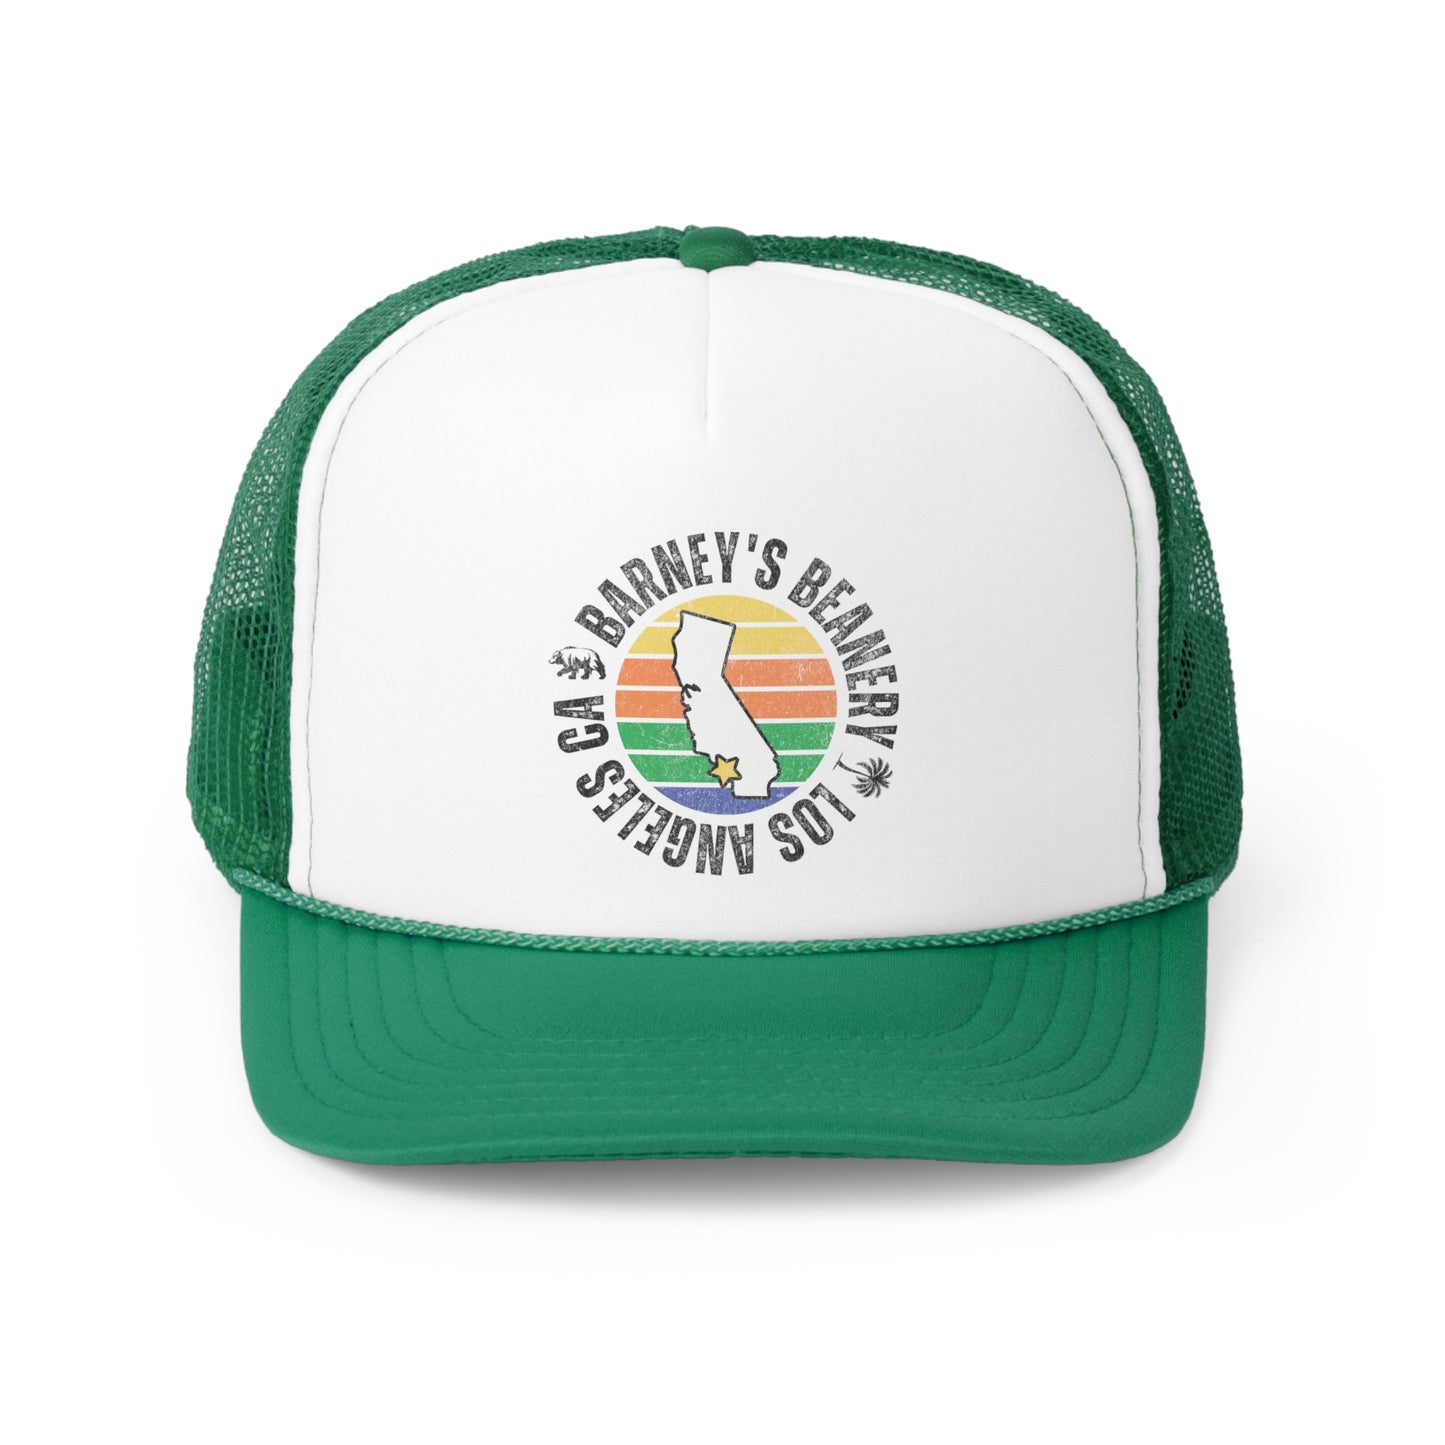 Retro Sunset | BARNEY'S BEANERY - Trucker Hat | Retro Sunset Graphic On Green And White Trucker Hat, Front View